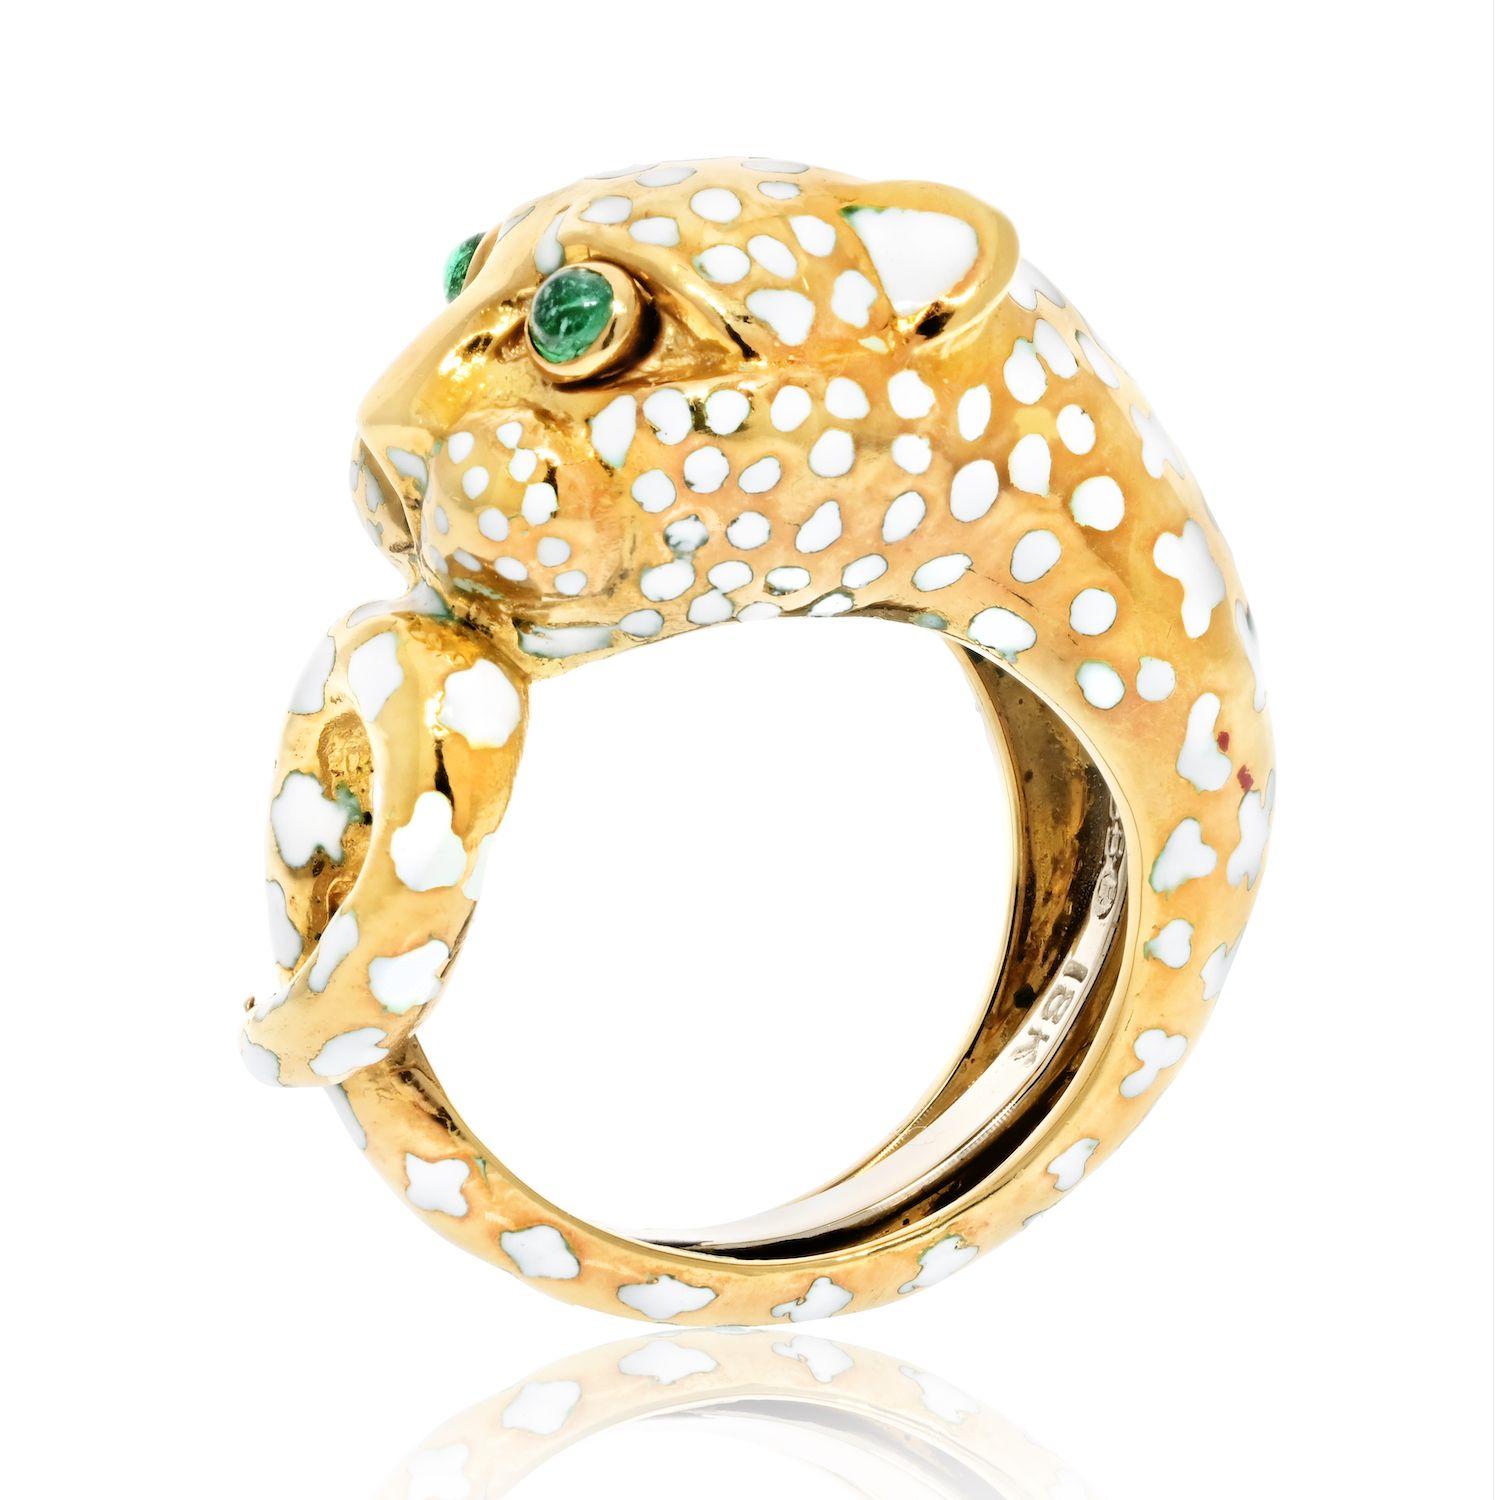 Owning this David Webb ring is truly exciting! The platinum, 18K yellow gold, and white enamel create a stunning and unique look that can't be matched. The green eyes of the leopard give the ring an extra spark of life, making it an eye-catching